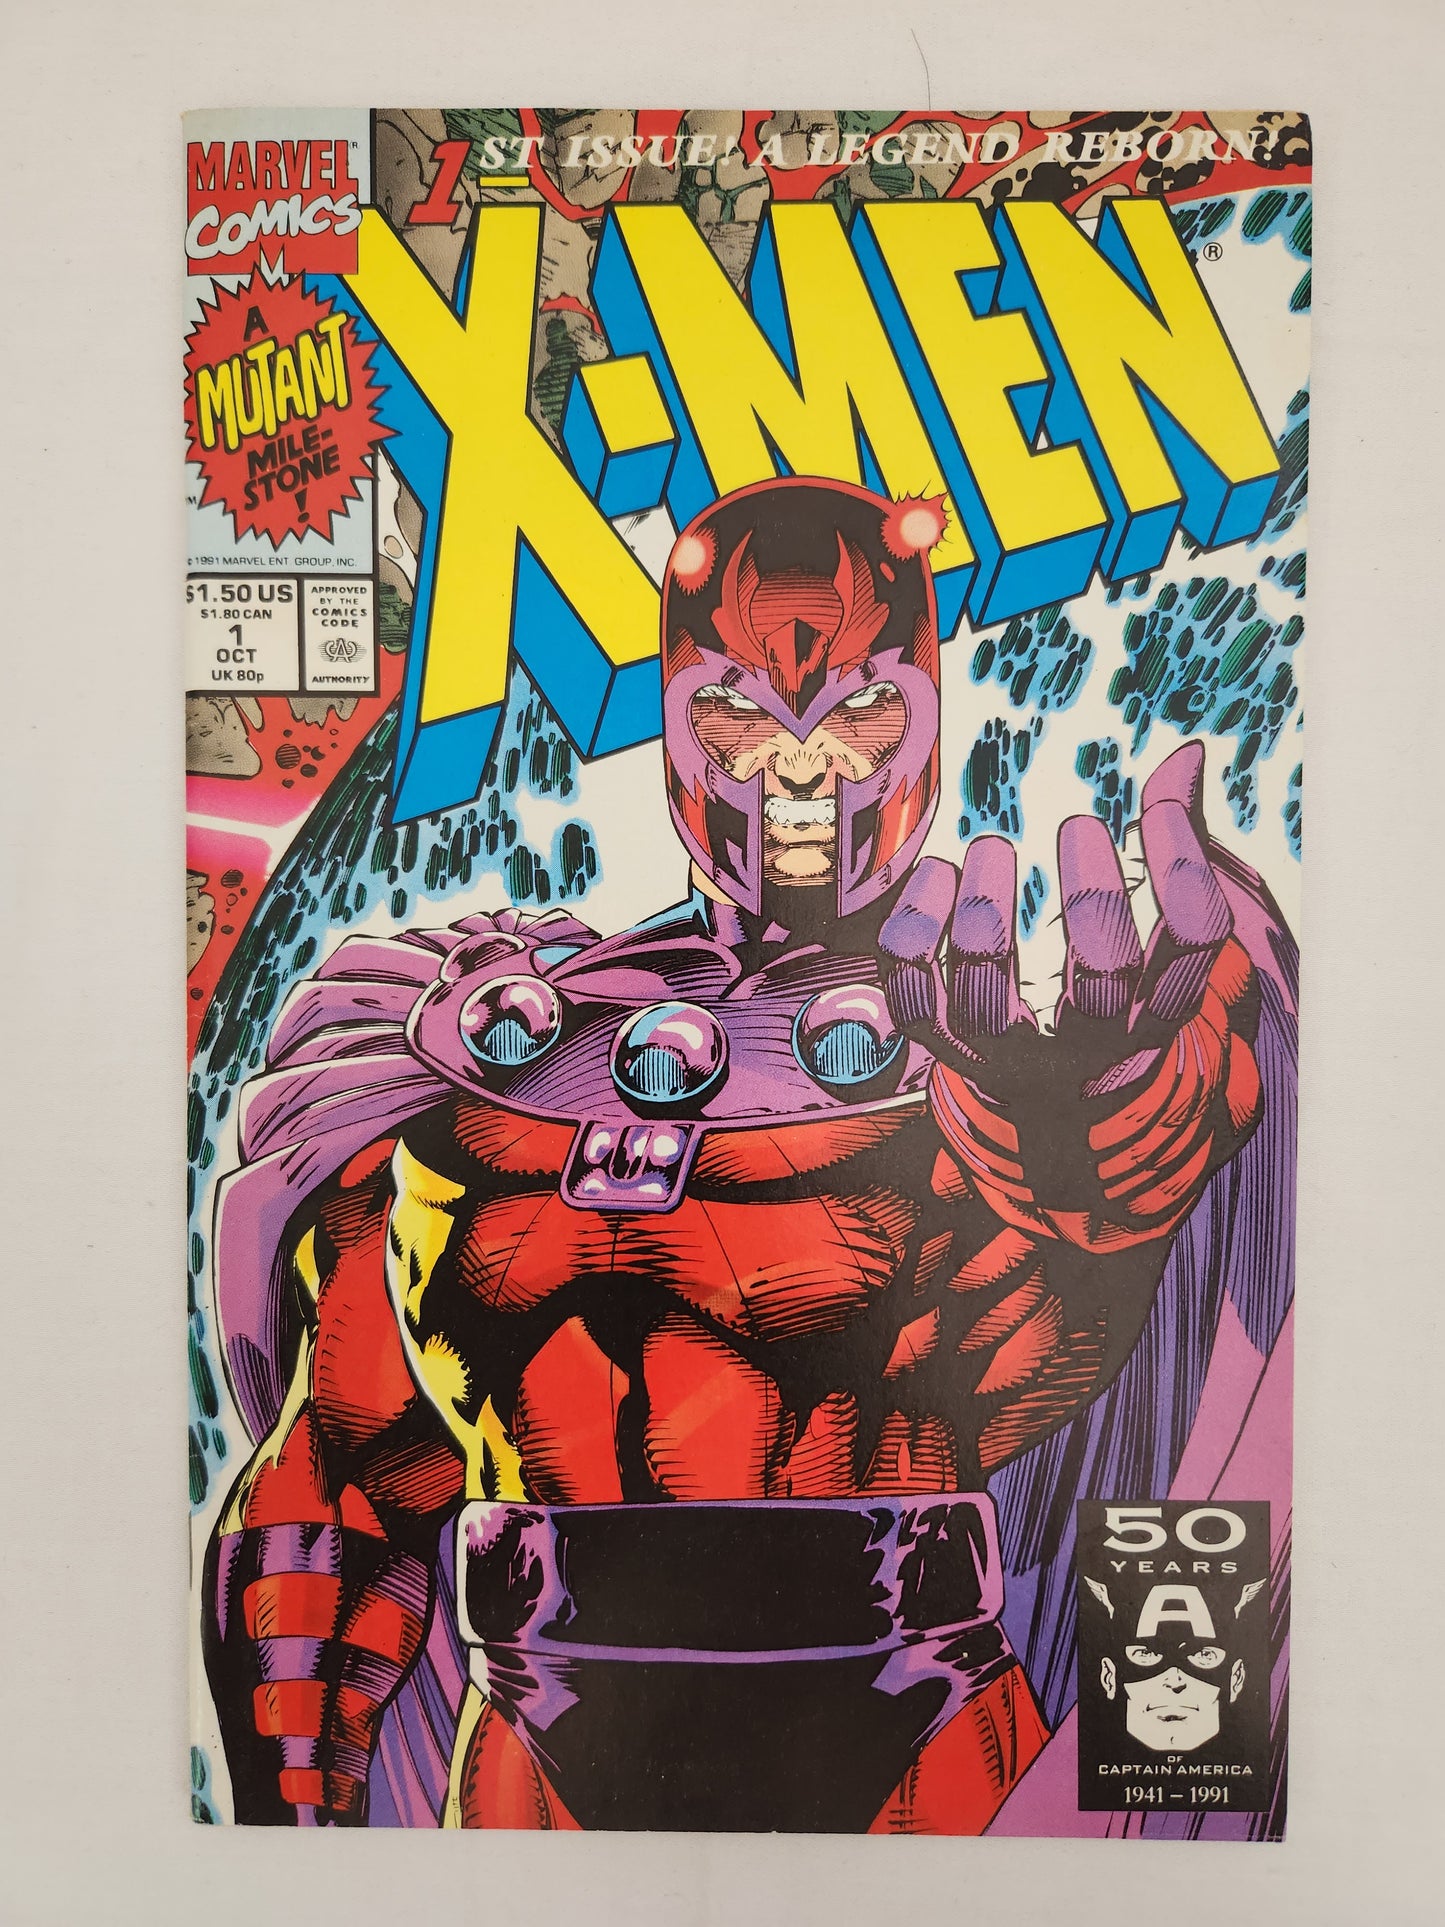 Lot of 4 Marvel Comics 1st Issue! A Legend Reborn! X-Men #1  - Connecting Covers